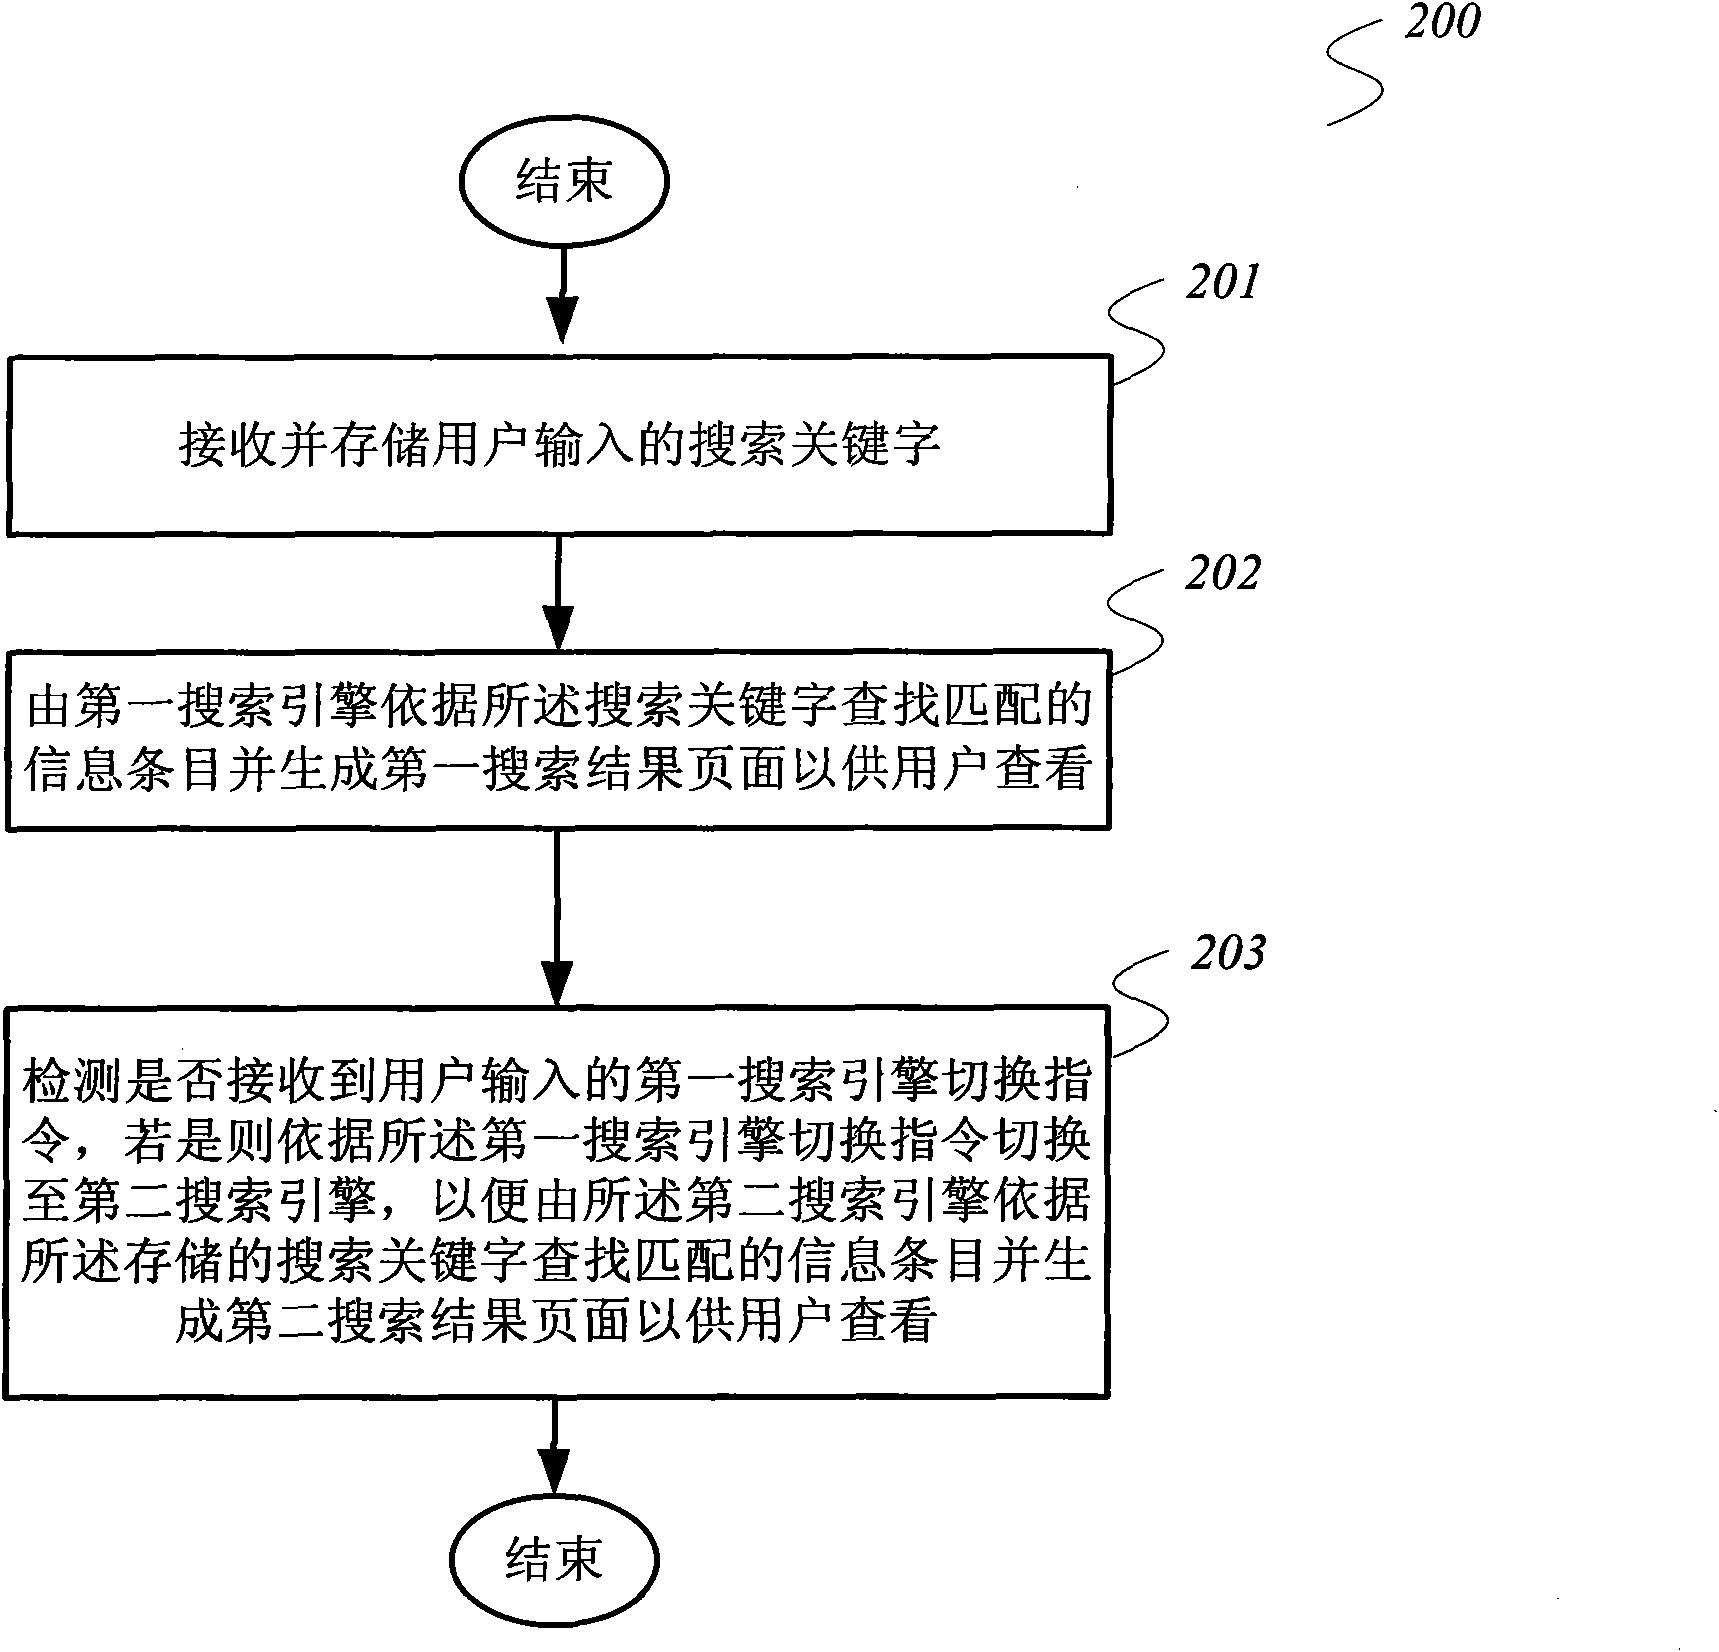 Mobile phone browser and mobile phone browser-based search engine switching method